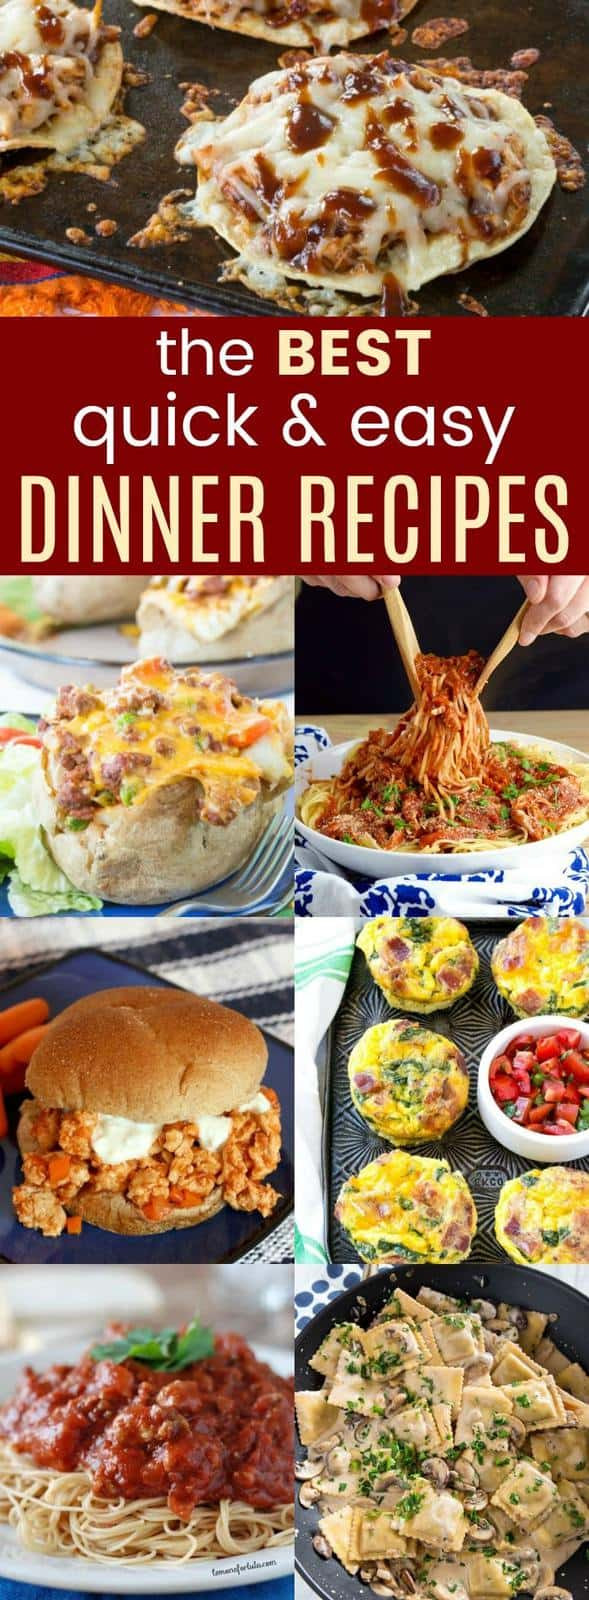 Easy And Quick Dinner Ideas
 Best Quick Easy Dinner Recipes Cupcakes & Kale Chips